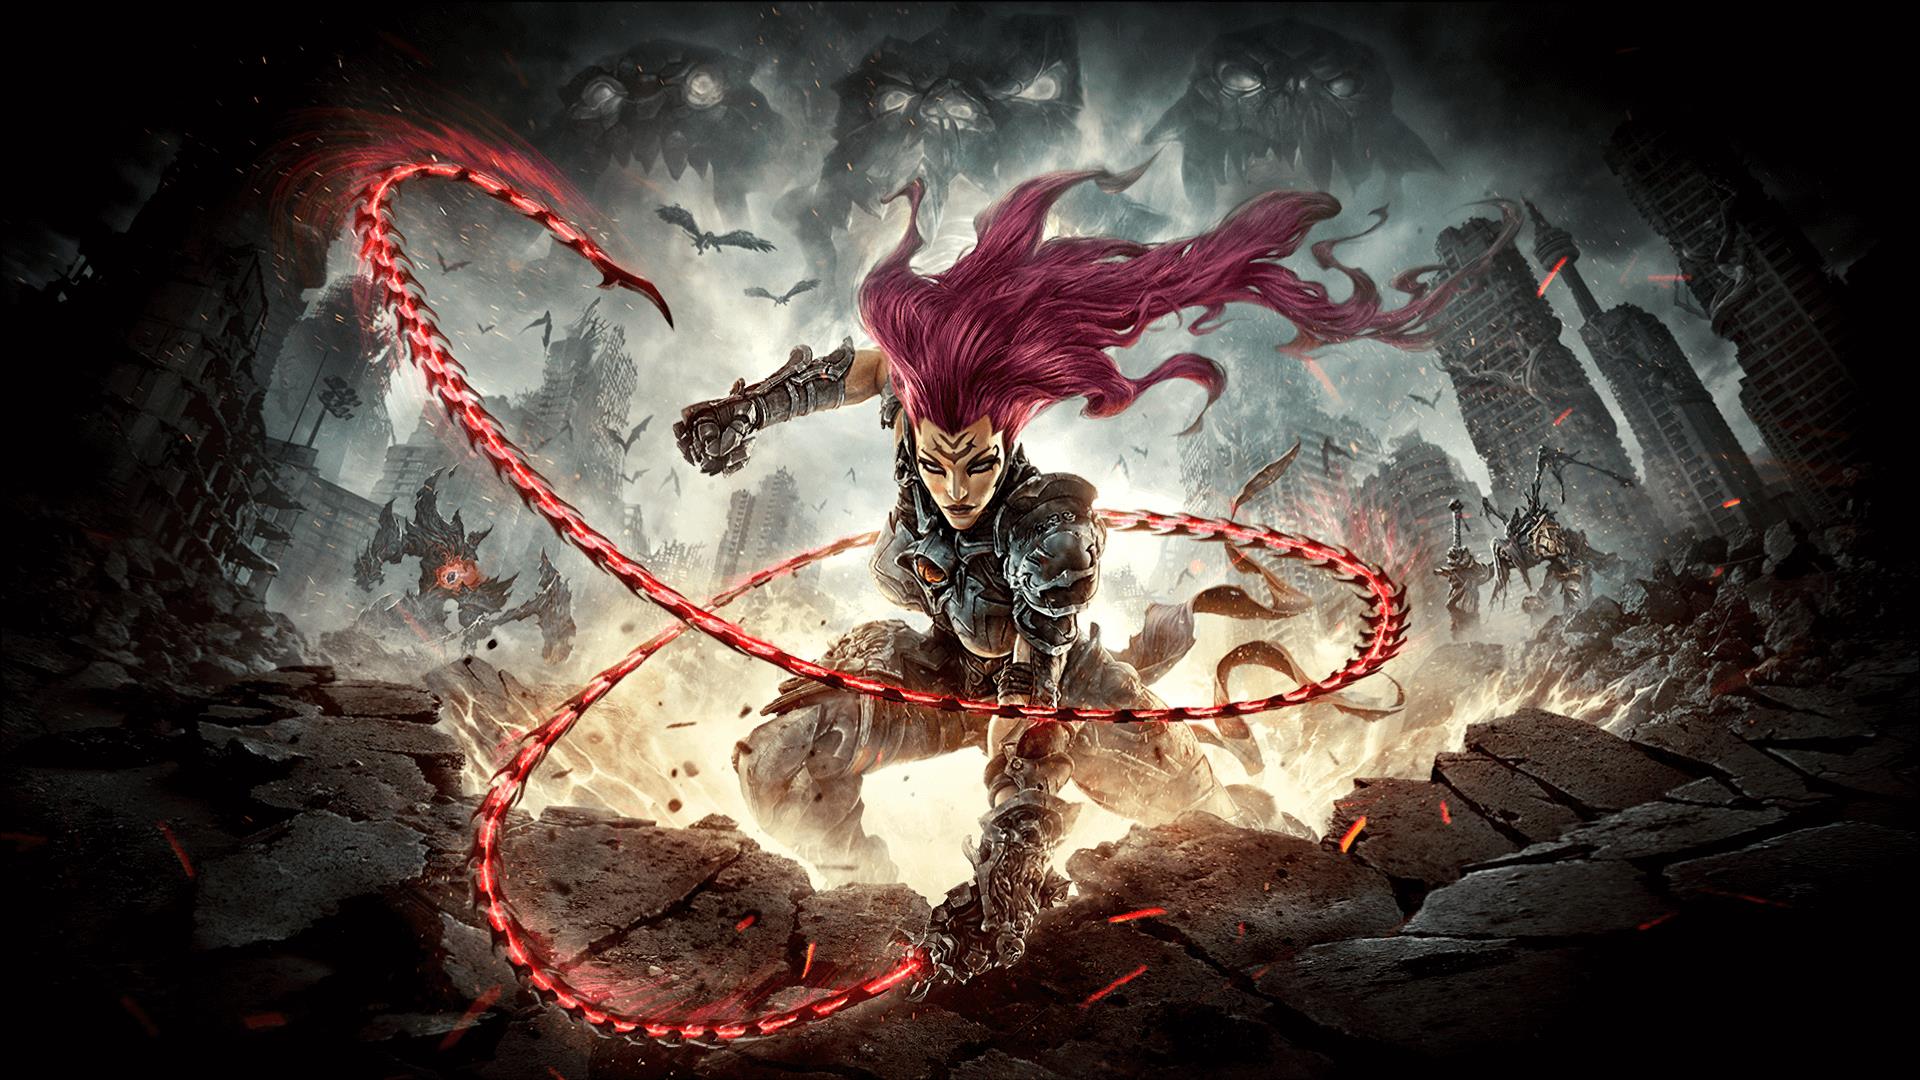 Darksiders III launches this November alongside huge collector’s edition